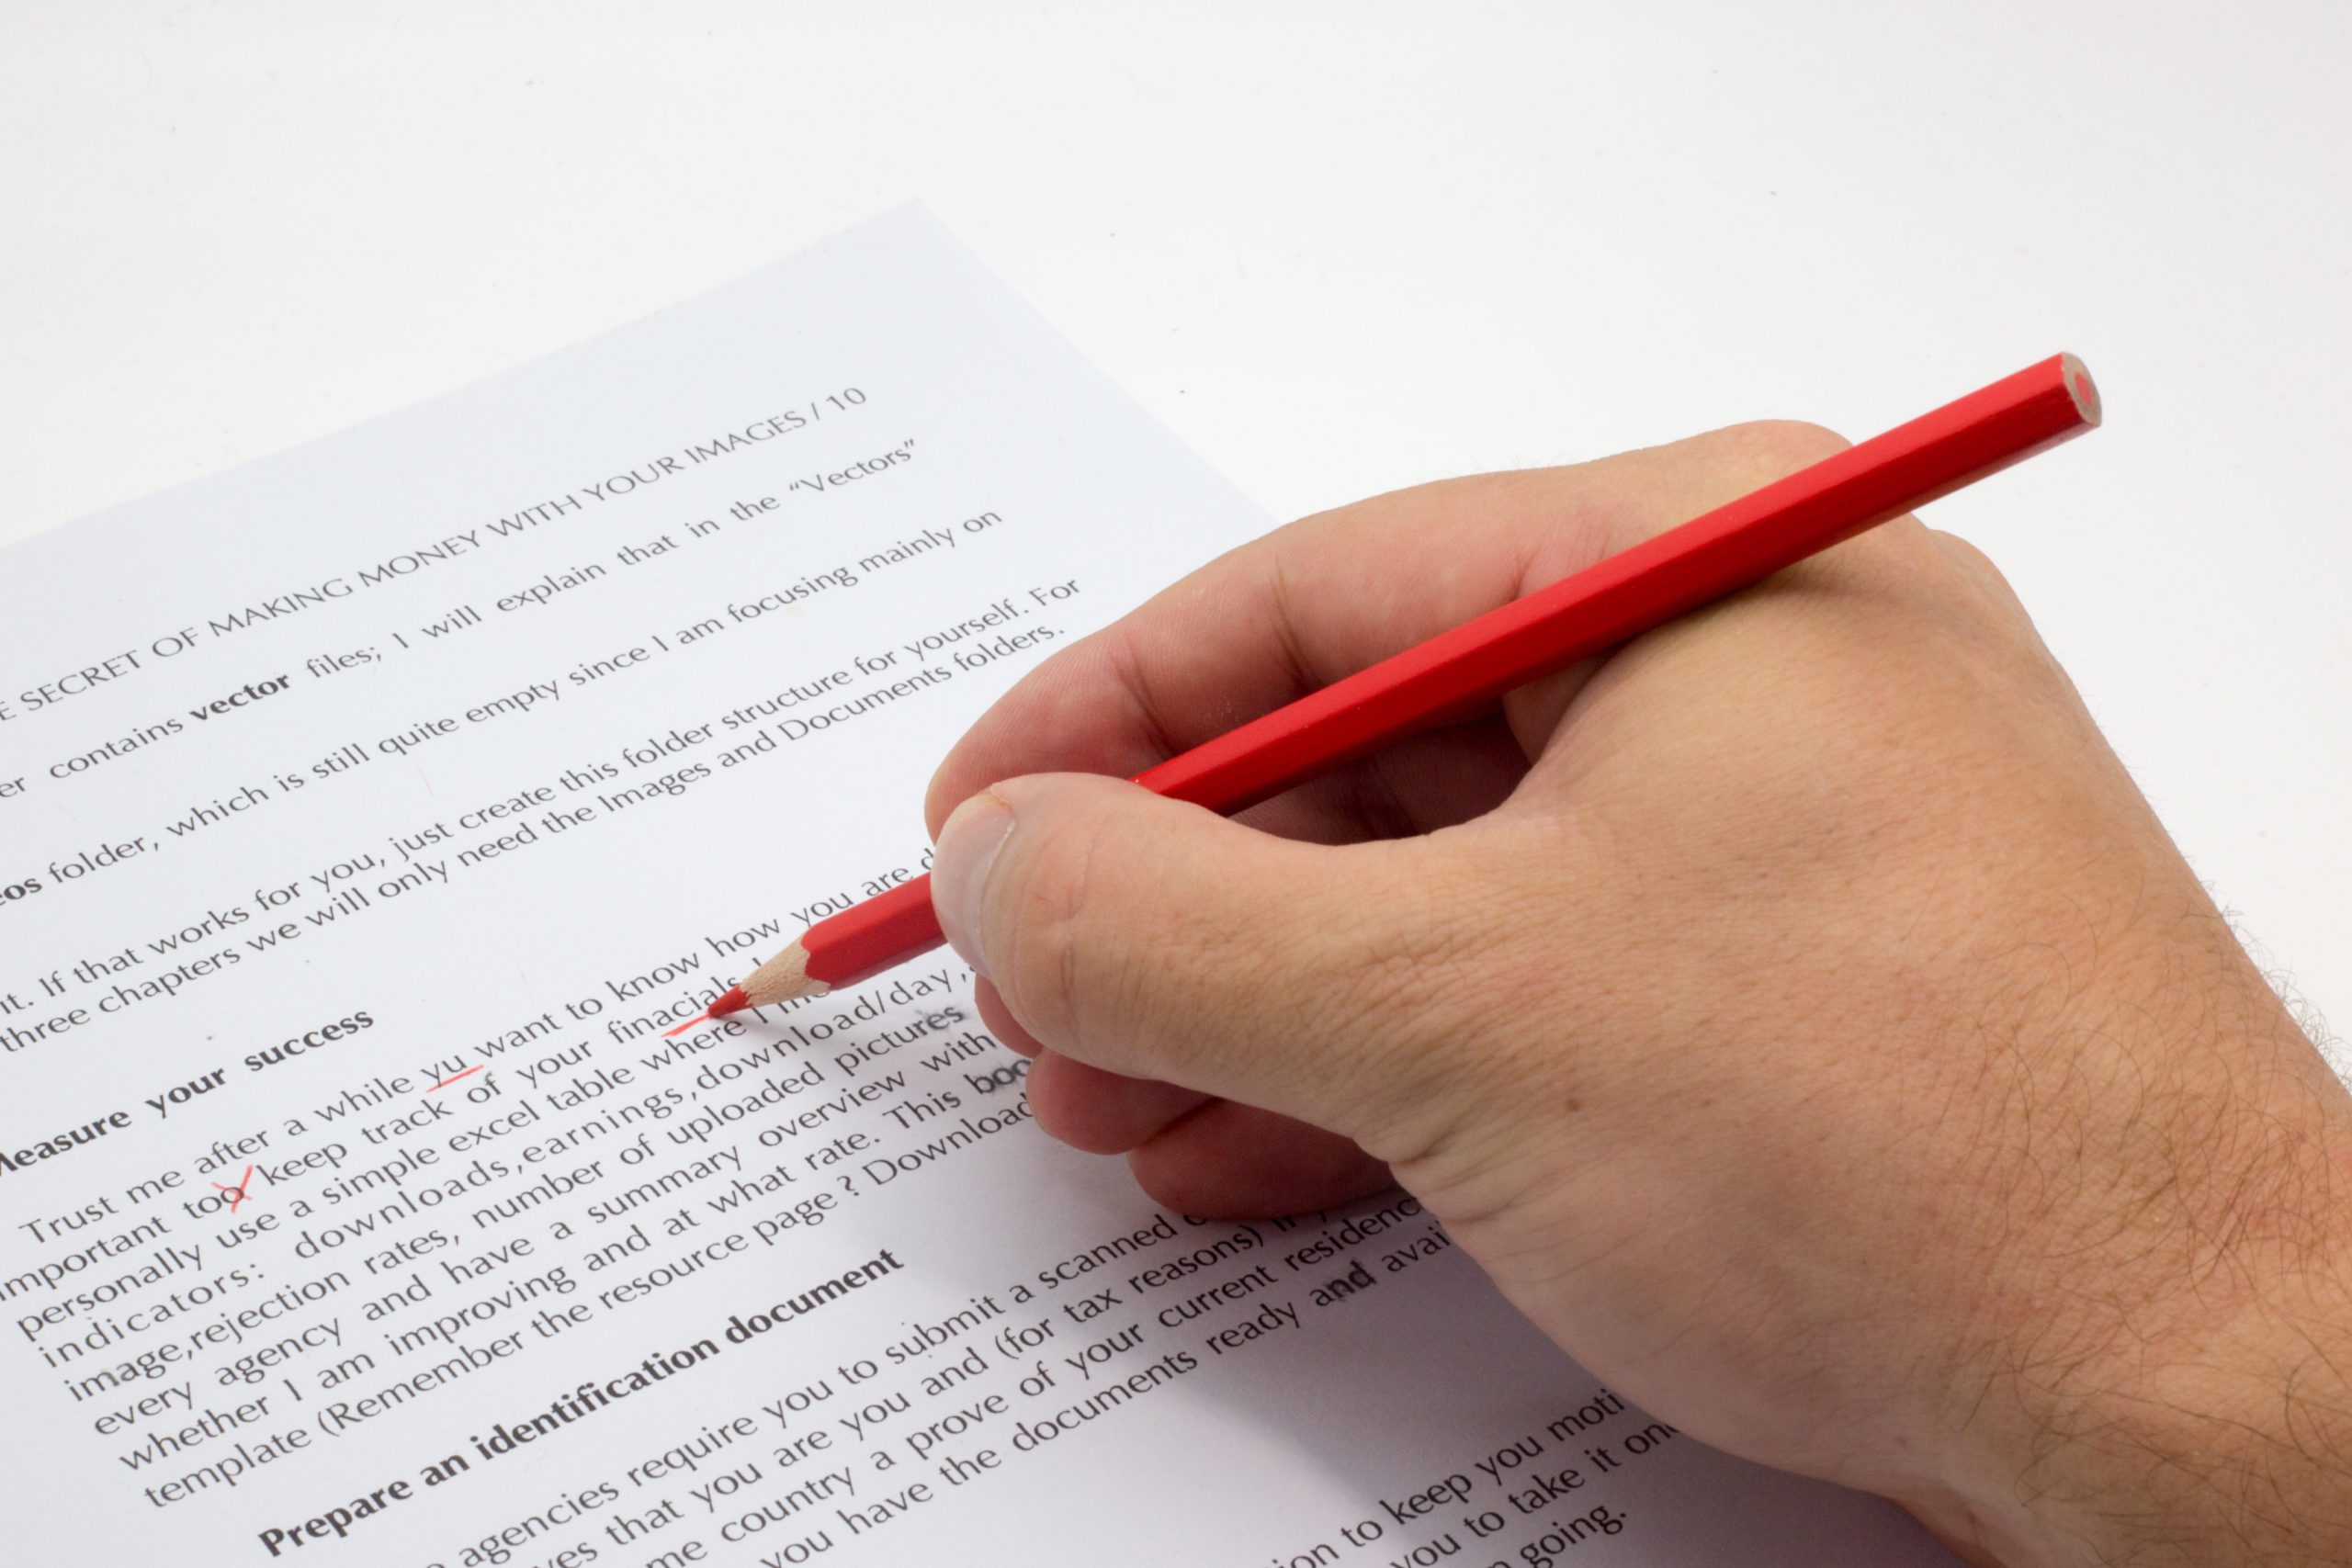 Hand holding a red pen proofreading and copyediting documents